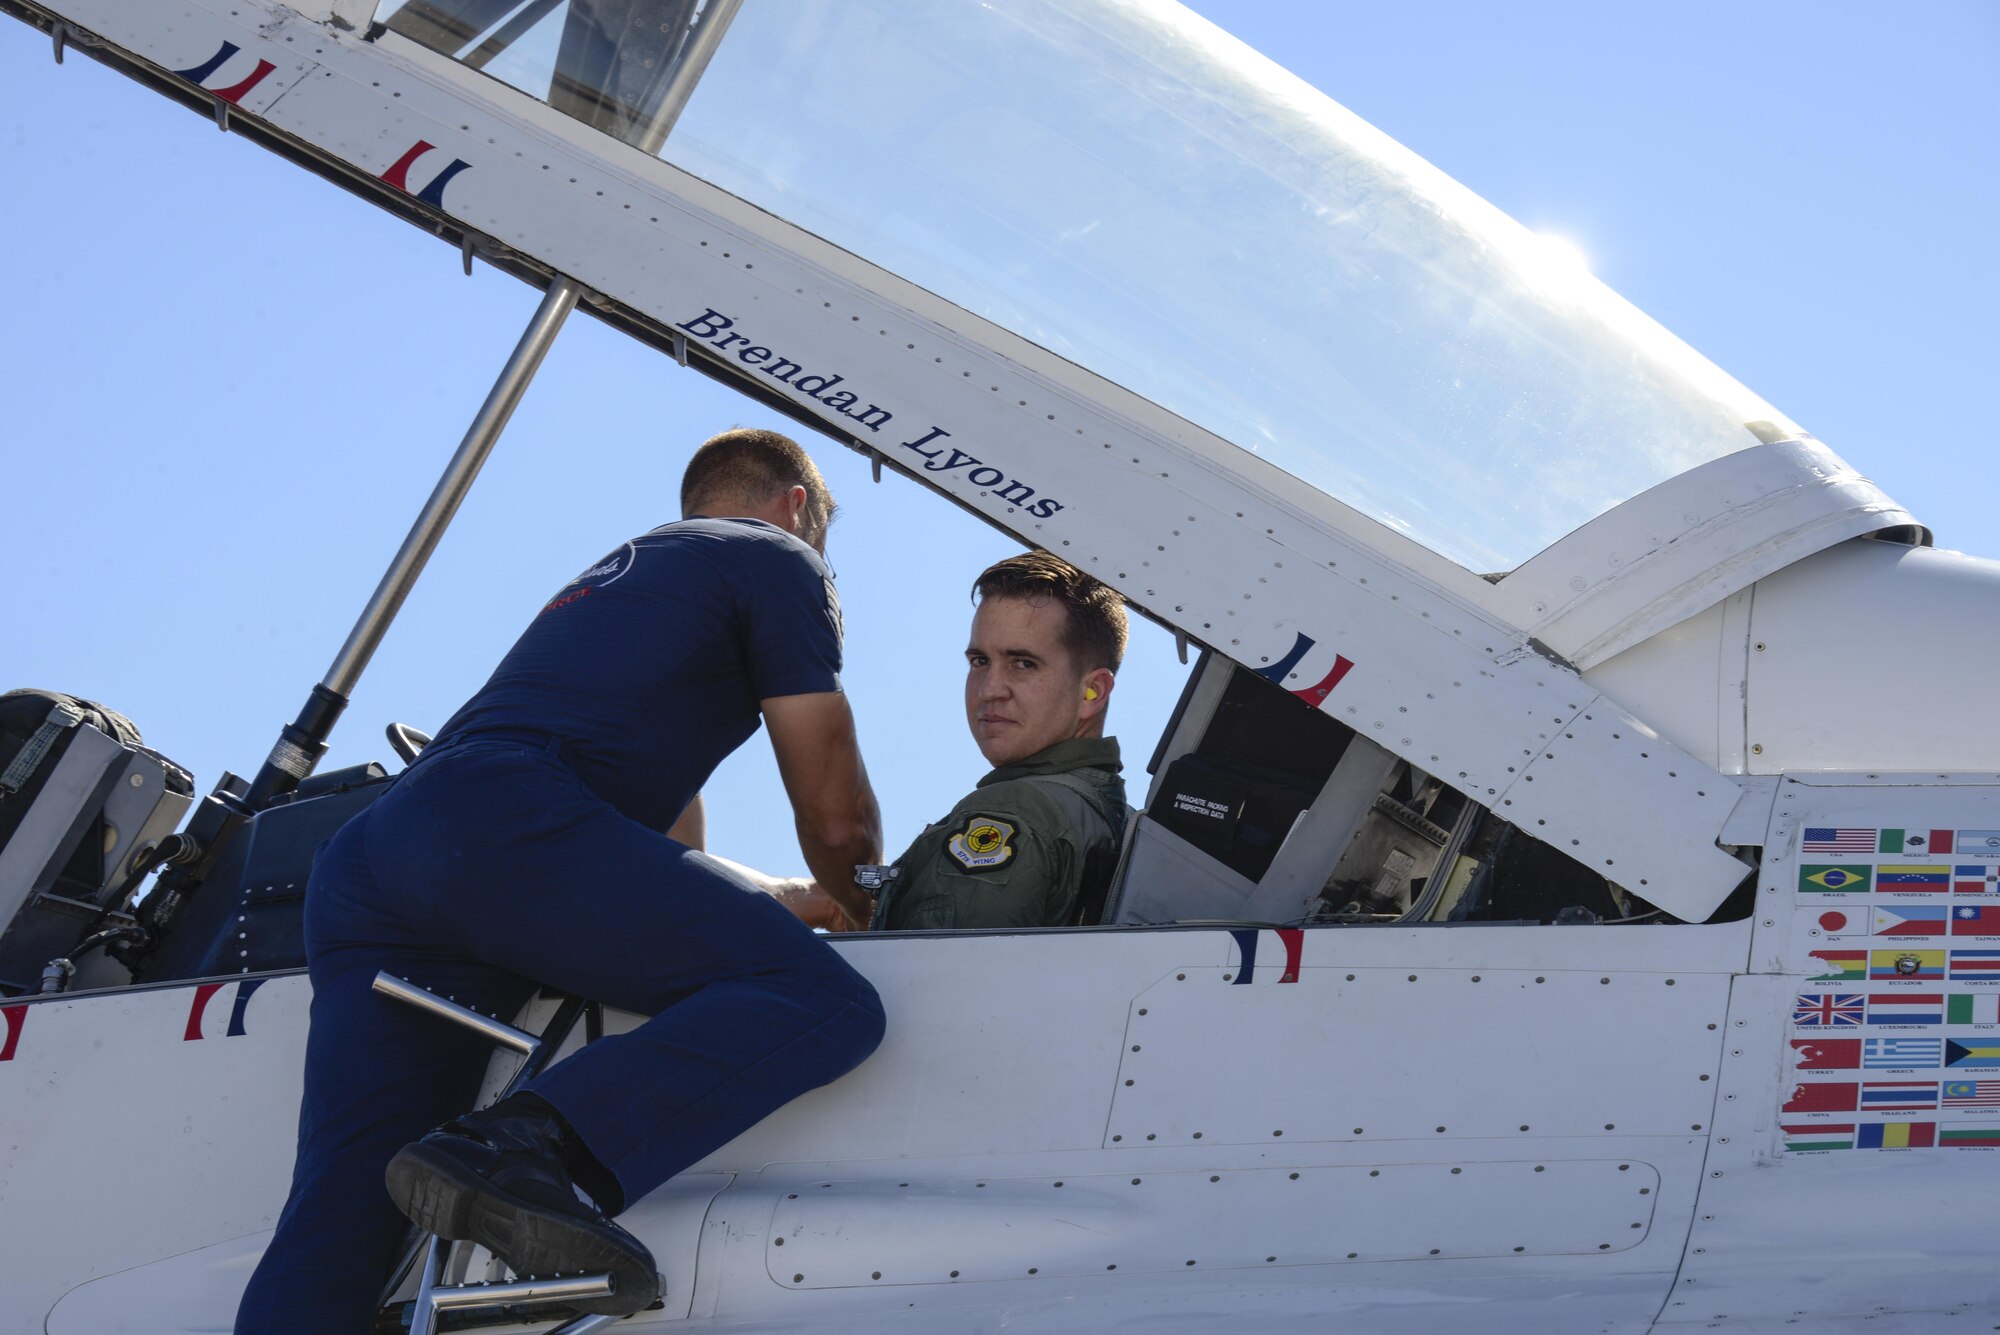 U.S. Air Force Staff Sgt. Conrad Nelson, from the U.S. Air Force Air Demonstration Squadron, secures Brendan Lyons, Tucson community hometown hero, in Thunderbird 7, an F-16 Fighting Falcon, at Davis-Monthan Air Force Base, Ariz., March 11, 2016.  Lyons was nominated as a hometown hero to fly with the Thunderbirds because of his commitment to safety and his passion to make Tucson a safer community for cyclists and motorists.  (U.S. Air Force photo by Senior Airman Chris Massey/Released)